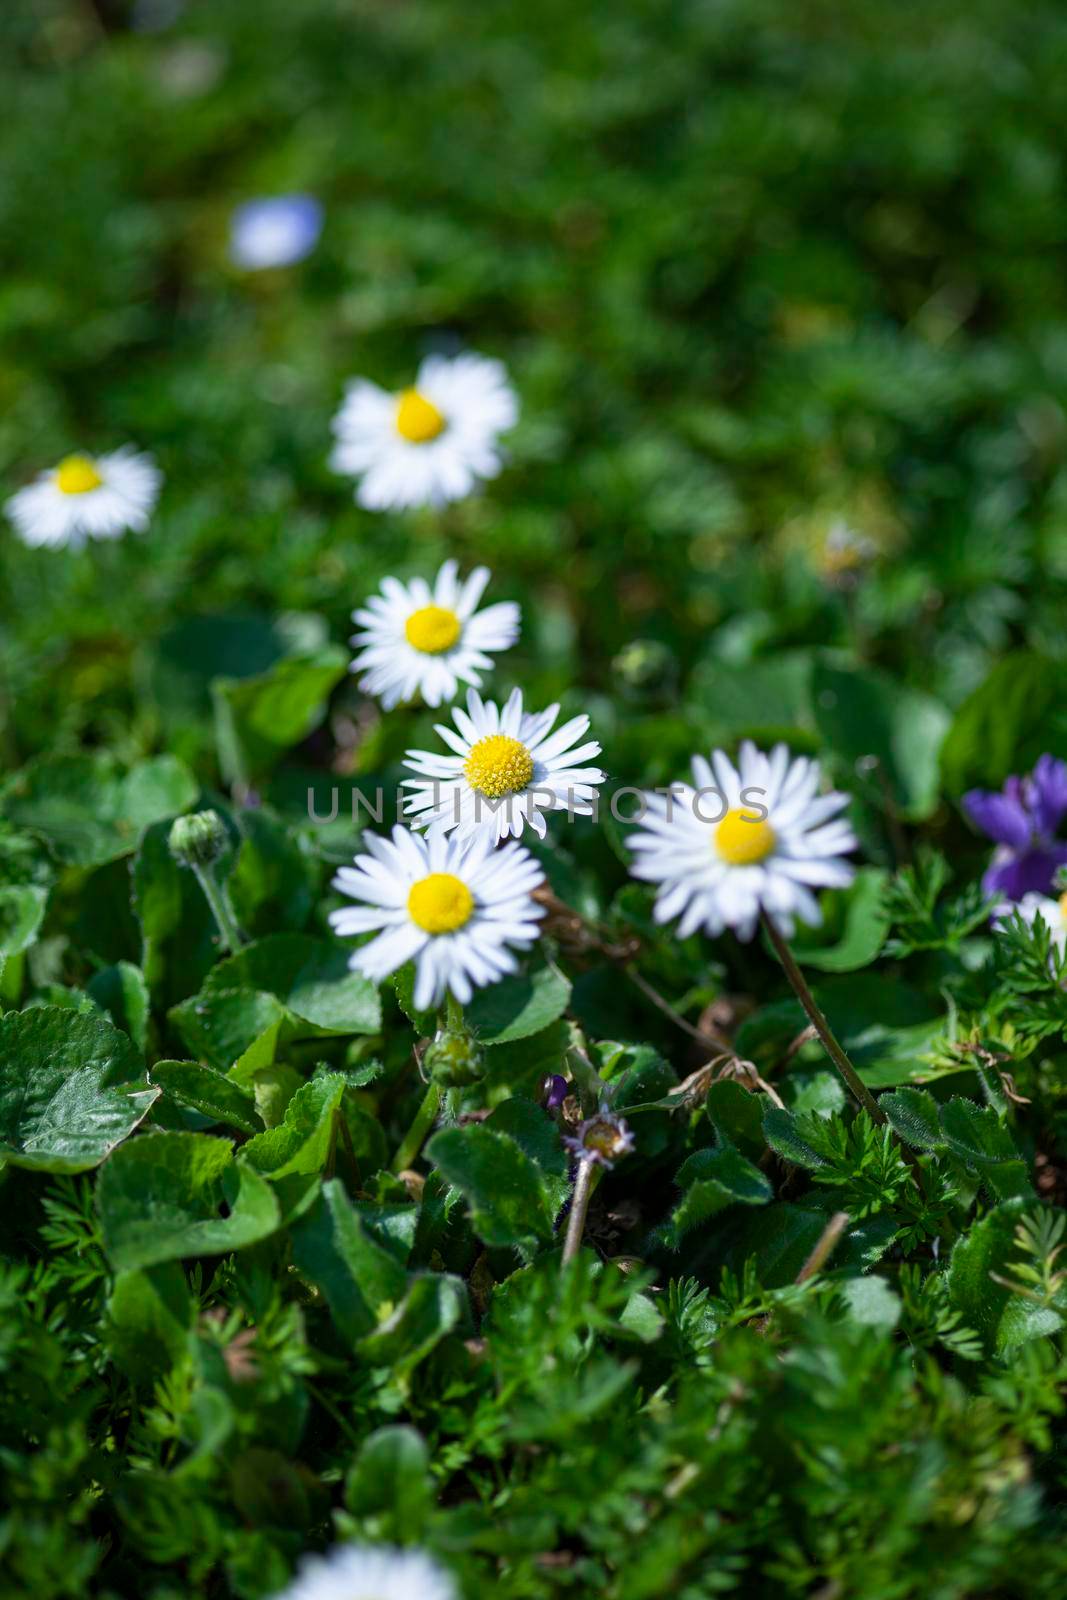 Daisy flower surrounded by green grass at spring